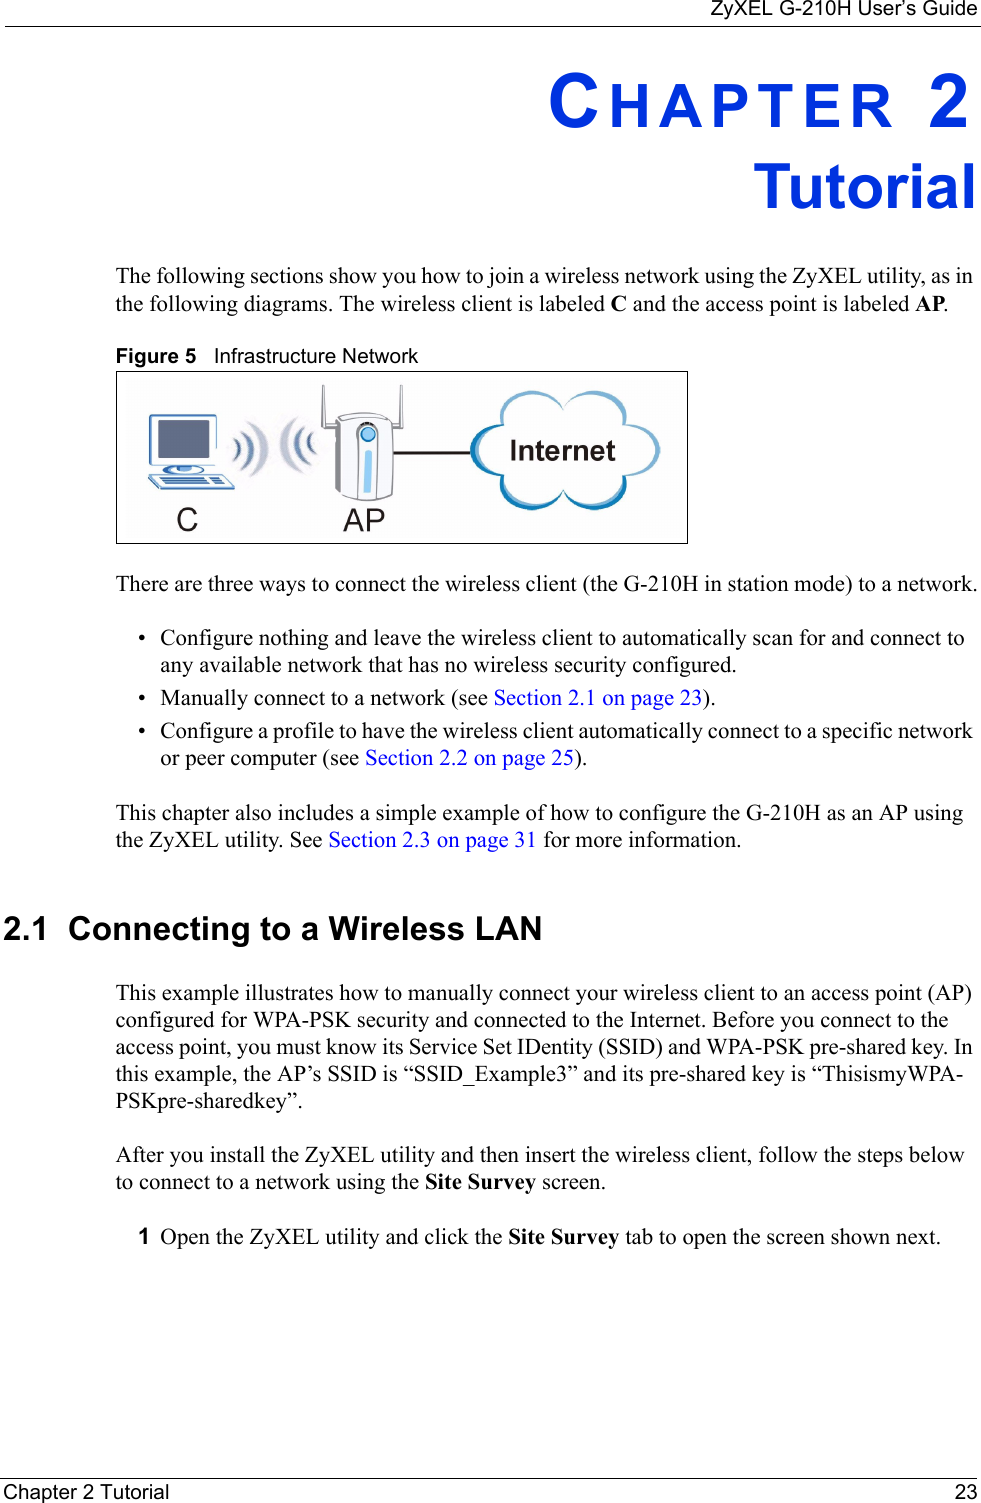 ZyXEL G-210H User’s GuideChapter 2 Tutorial 23CHAPTER 2TutorialThe following sections show you how to join a wireless network using the ZyXEL utility, as in the following diagrams. The wireless client is labeled C and the access point is labeled AP. Figure 5   Infrastructure NetworkThere are three ways to connect the wireless client (the G-210H in station mode) to a network.• Configure nothing and leave the wireless client to automatically scan for and connect to any available network that has no wireless security configured.• Manually connect to a network (see Section 2.1 on page 23).• Configure a profile to have the wireless client automatically connect to a specific network or peer computer (see Section 2.2 on page 25). This chapter also includes a simple example of how to configure the G-210H as an AP using the ZyXEL utility. See Section 2.3 on page 31 for more information.2.1  Connecting to a Wireless LAN This example illustrates how to manually connect your wireless client to an access point (AP) configured for WPA-PSK security and connected to the Internet. Before you connect to the access point, you must know its Service Set IDentity (SSID) and WPA-PSK pre-shared key. In this example, the AP’s SSID is “SSID_Example3” and its pre-shared key is “ThisismyWPA-PSKpre-sharedkey”. After you install the ZyXEL utility and then insert the wireless client, follow the steps below to connect to a network using the Site Survey screen. 1Open the ZyXEL utility and click the Site Survey tab to open the screen shown next.